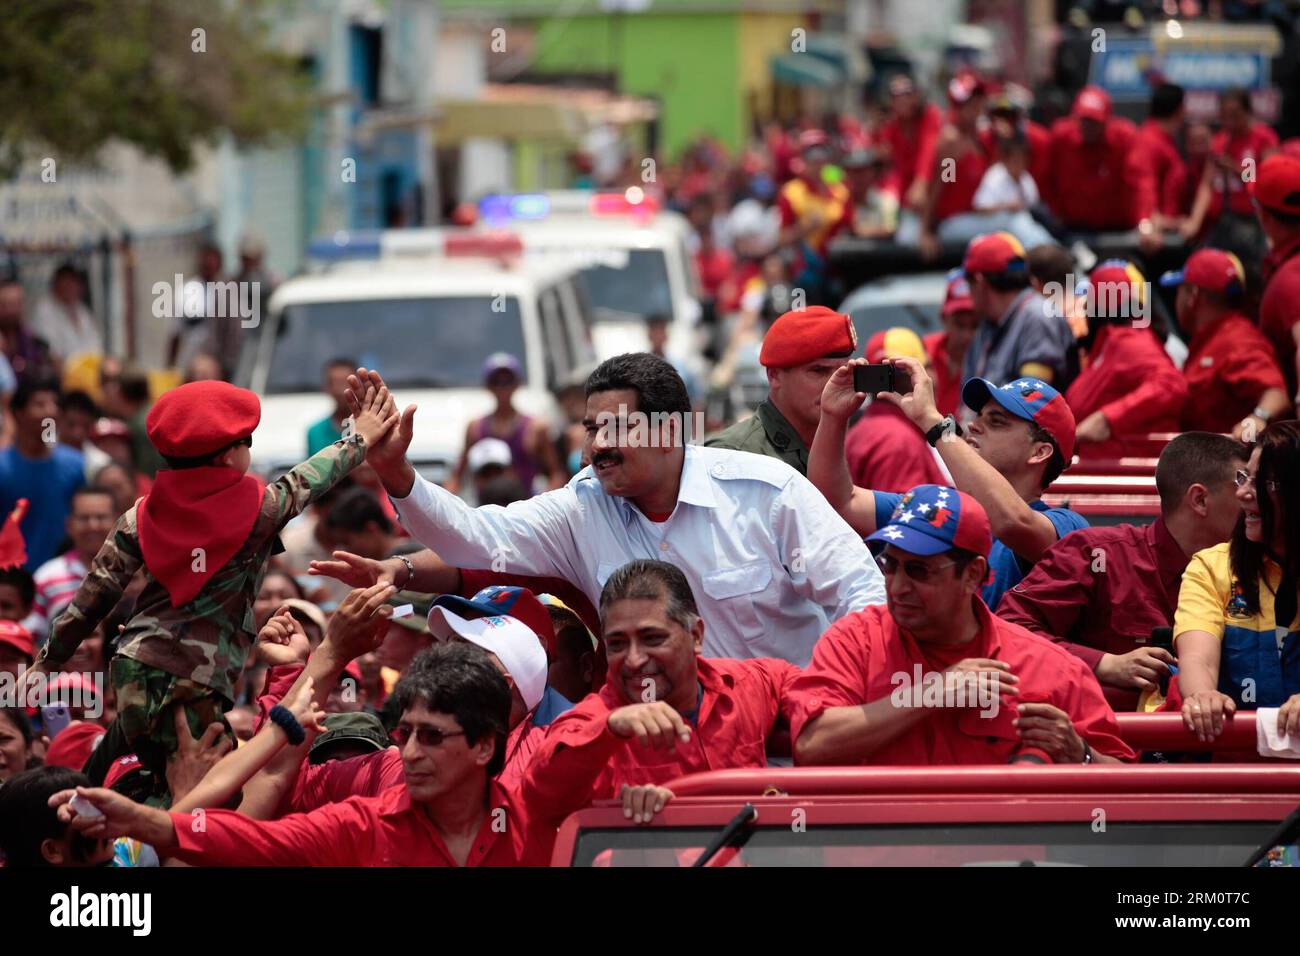 Bildnummer: 59468337  Datum: 02.04.2013  Copyright: imago/Xinhua (130403) -- BARINAS, April 3, 2013 (Xinhua) -- Photo provided by Command Campaign Hugo Chavez shows Venezuela s Acting President and presidential candidate Nicolas Maduro clapping with a supporter before a rally in Barinas, Venezuela, April 2, 2013. The electoral campaign in Venezuela, heading for the upcoming presidential elections on April 14, officially started on Tuesday and will run for 10 days, during which the candidates will present their proposals to the entire country. (Xinhua/Command Campaign Hugo Chavez) (djj) VENEZUE Stock Photo